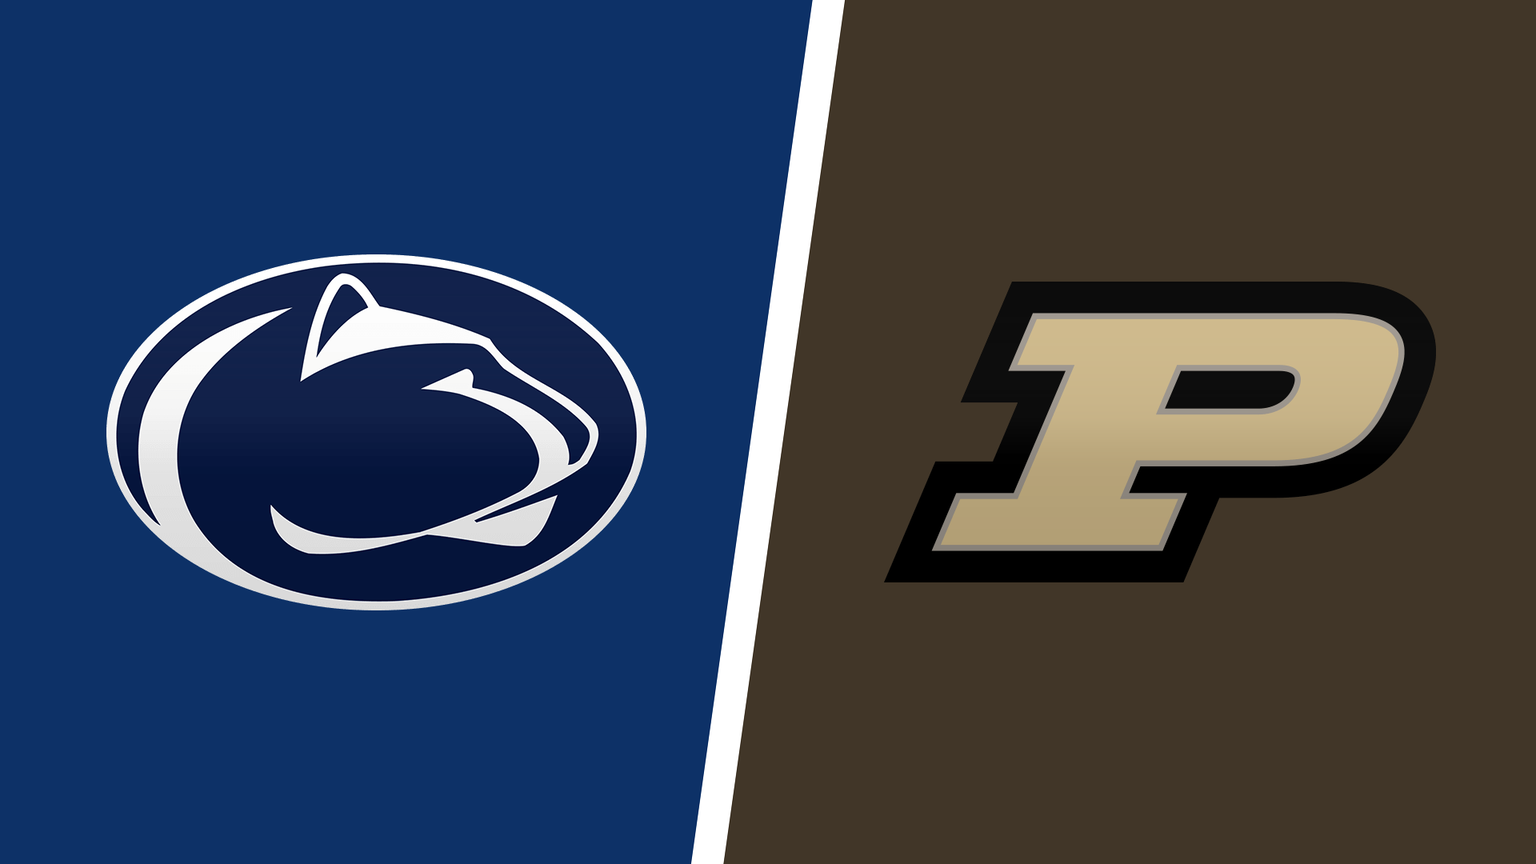 How to Watch Purdue vs. Penn State Game Live Online on January 8, 2022